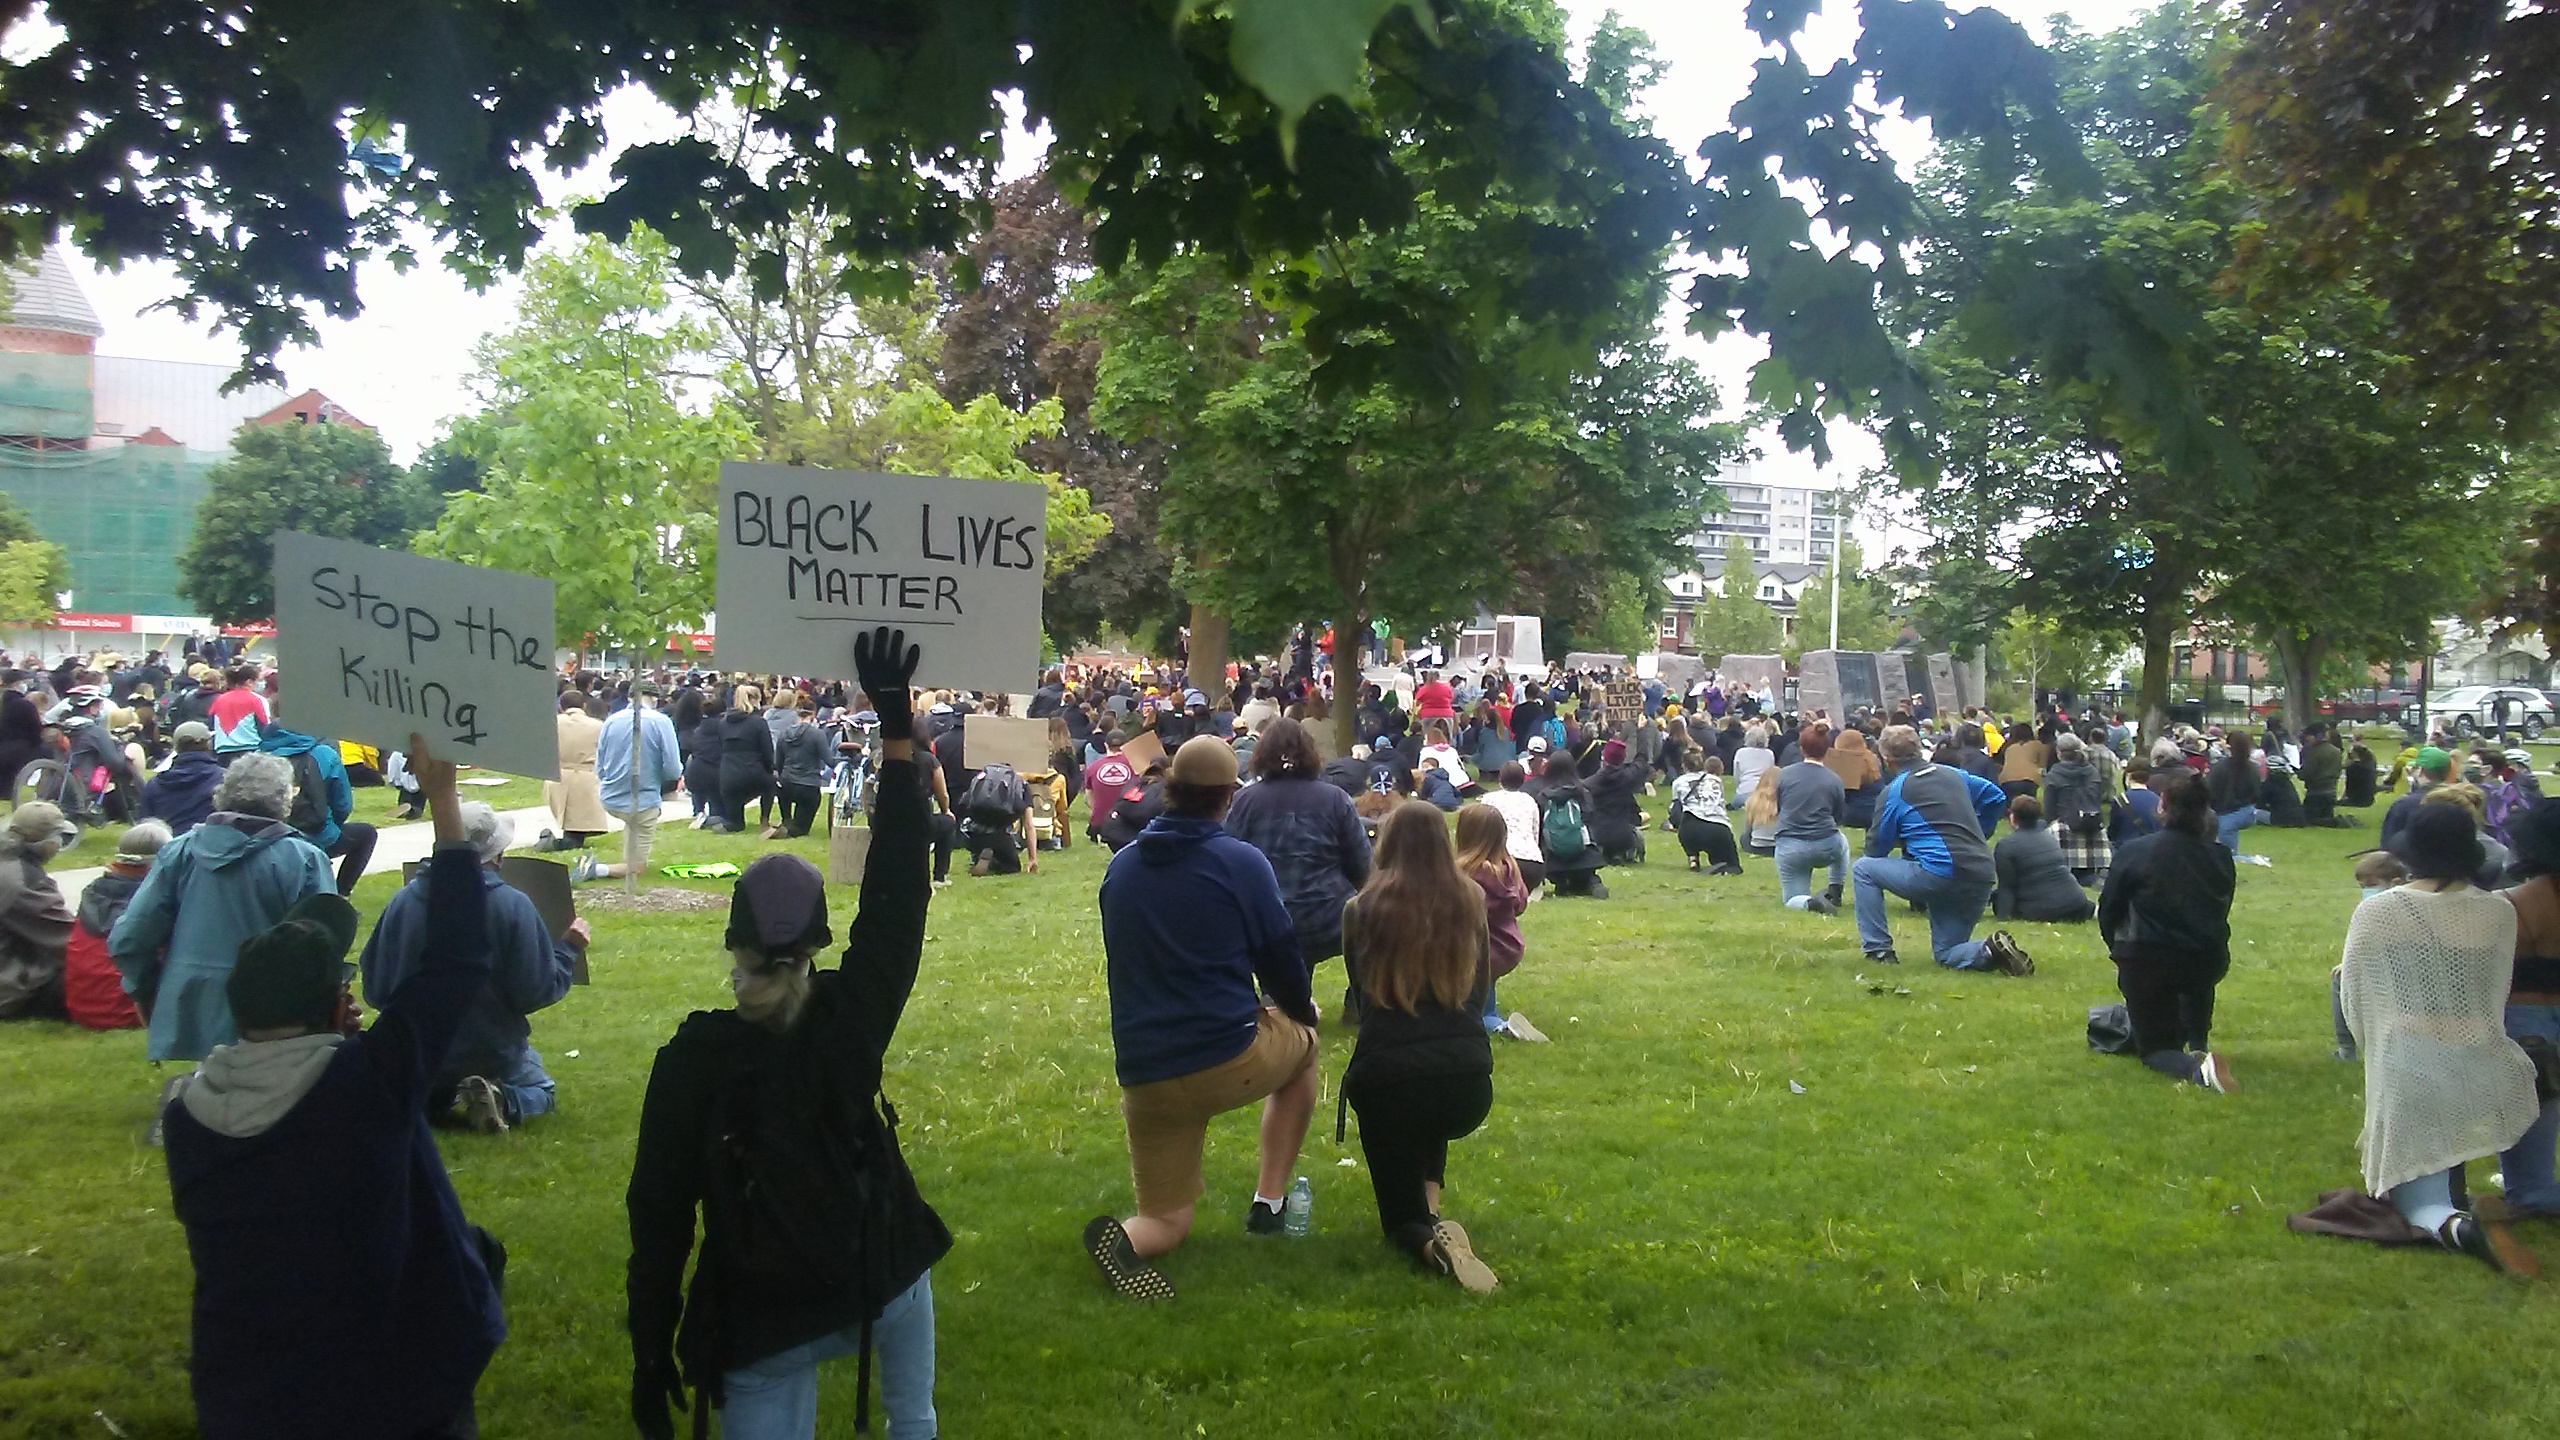 two people holding up signs that say "stop the killing" and "black lives matter" in a crowded park